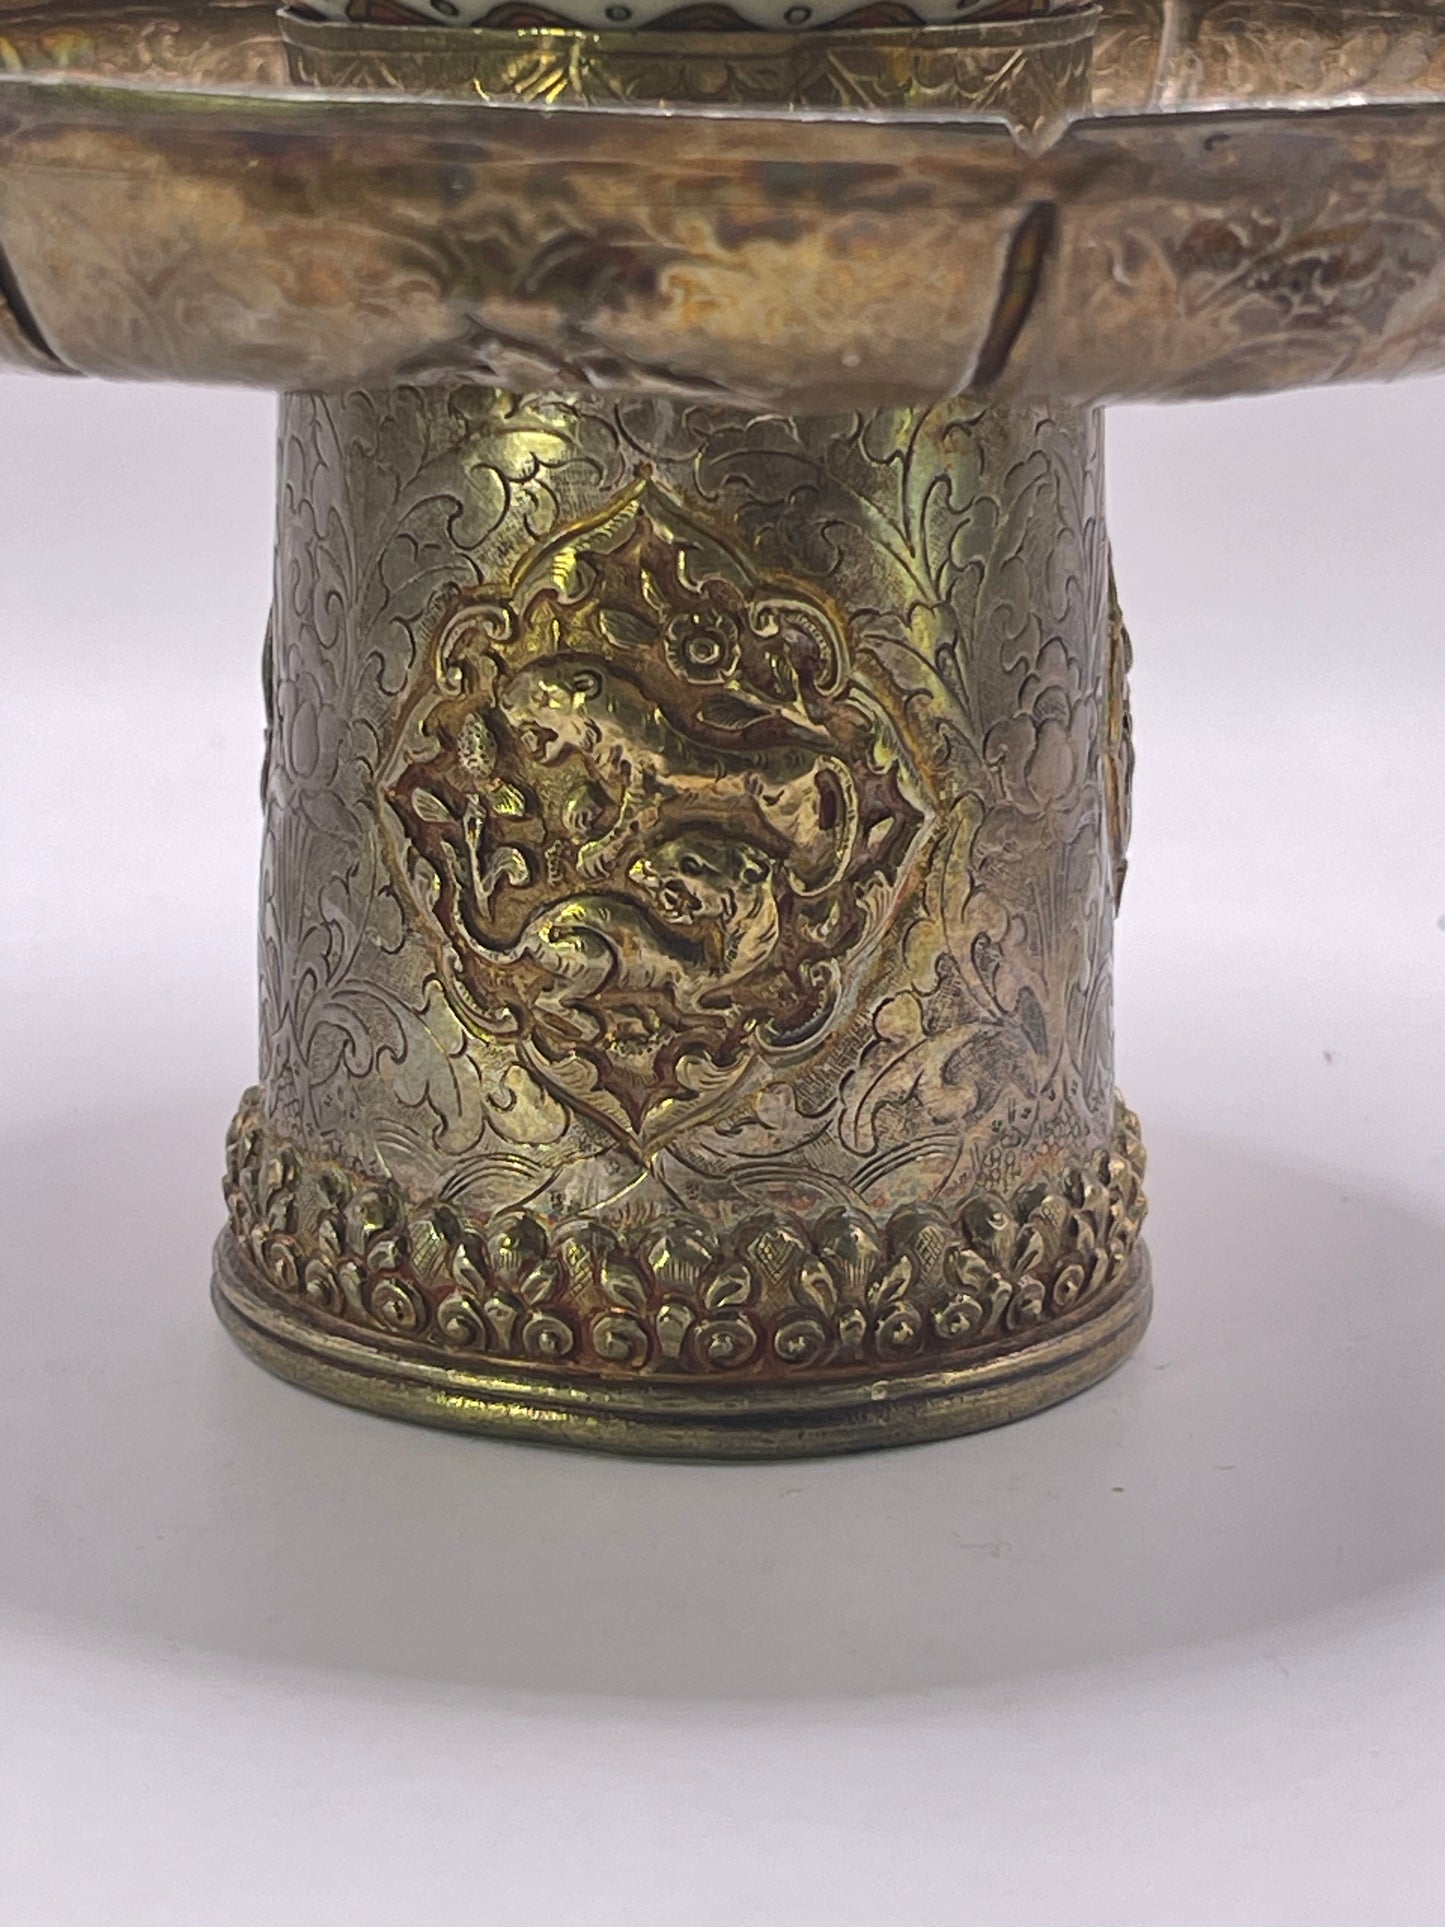 Vintage silver and gilded silver  Tibetan cup stand